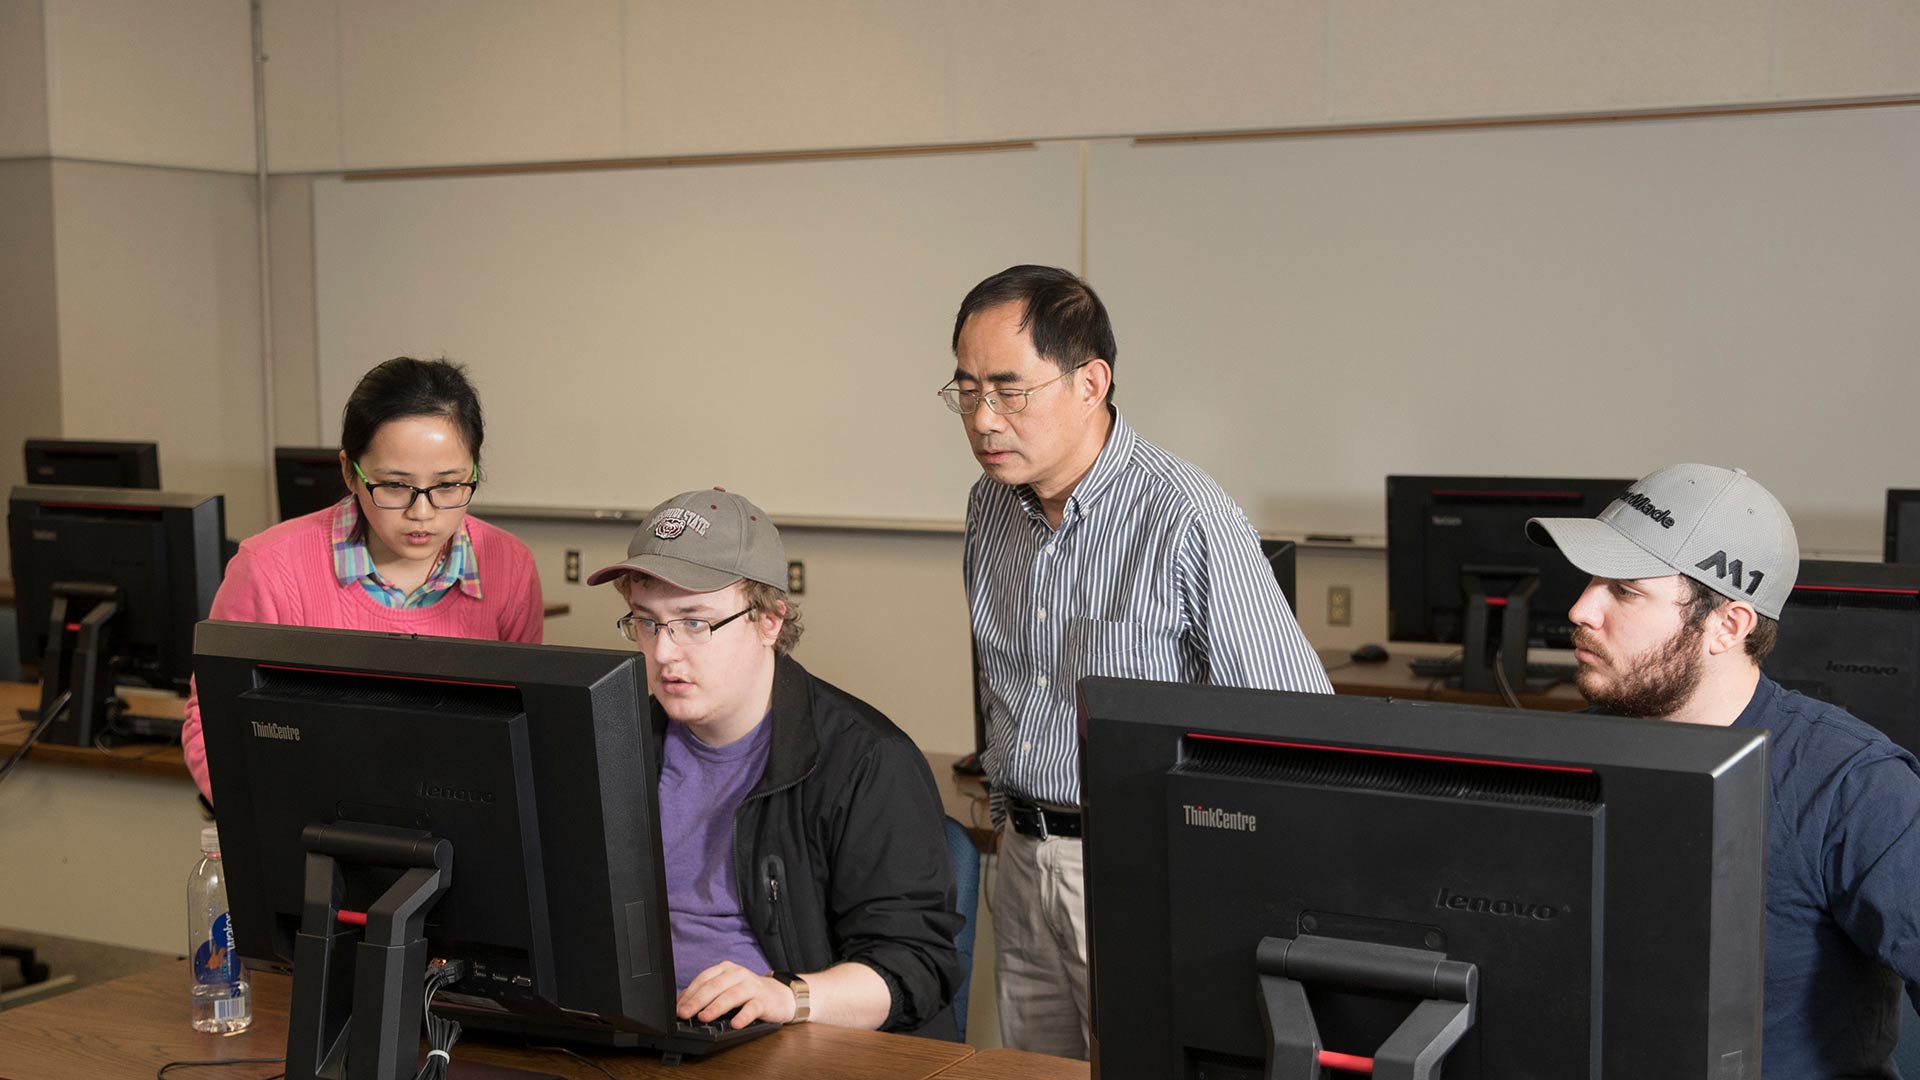 Mathematics professor Dr. Xingping Sun and three students look at math problems on a computer during class.